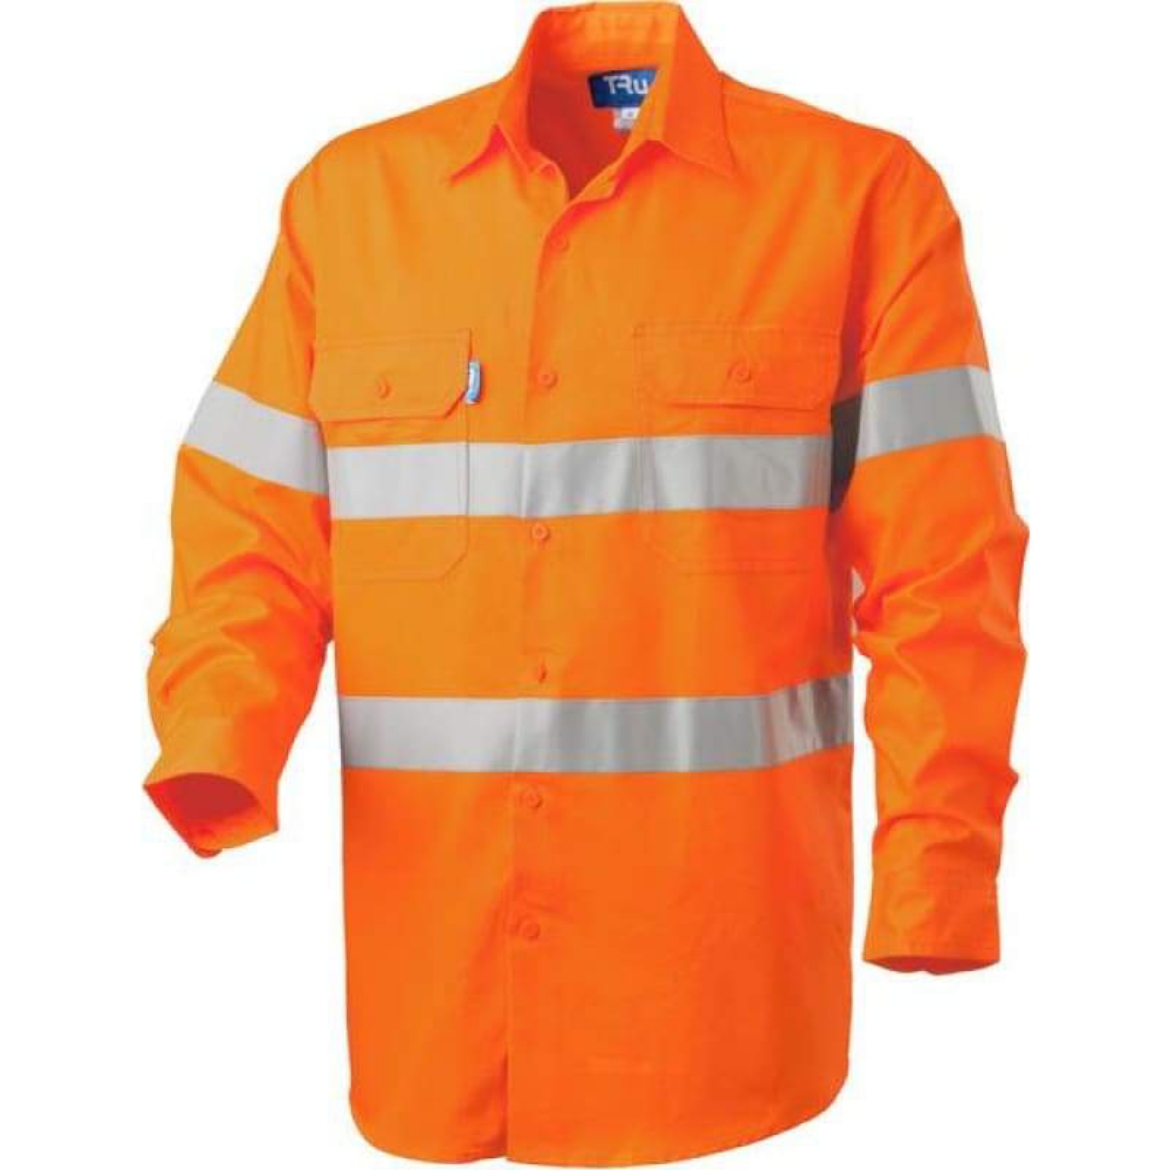 Picture of Tru Workwear, Shirt, Long Sleeve, Light Cotton Drill, 3M Tape, H Vents